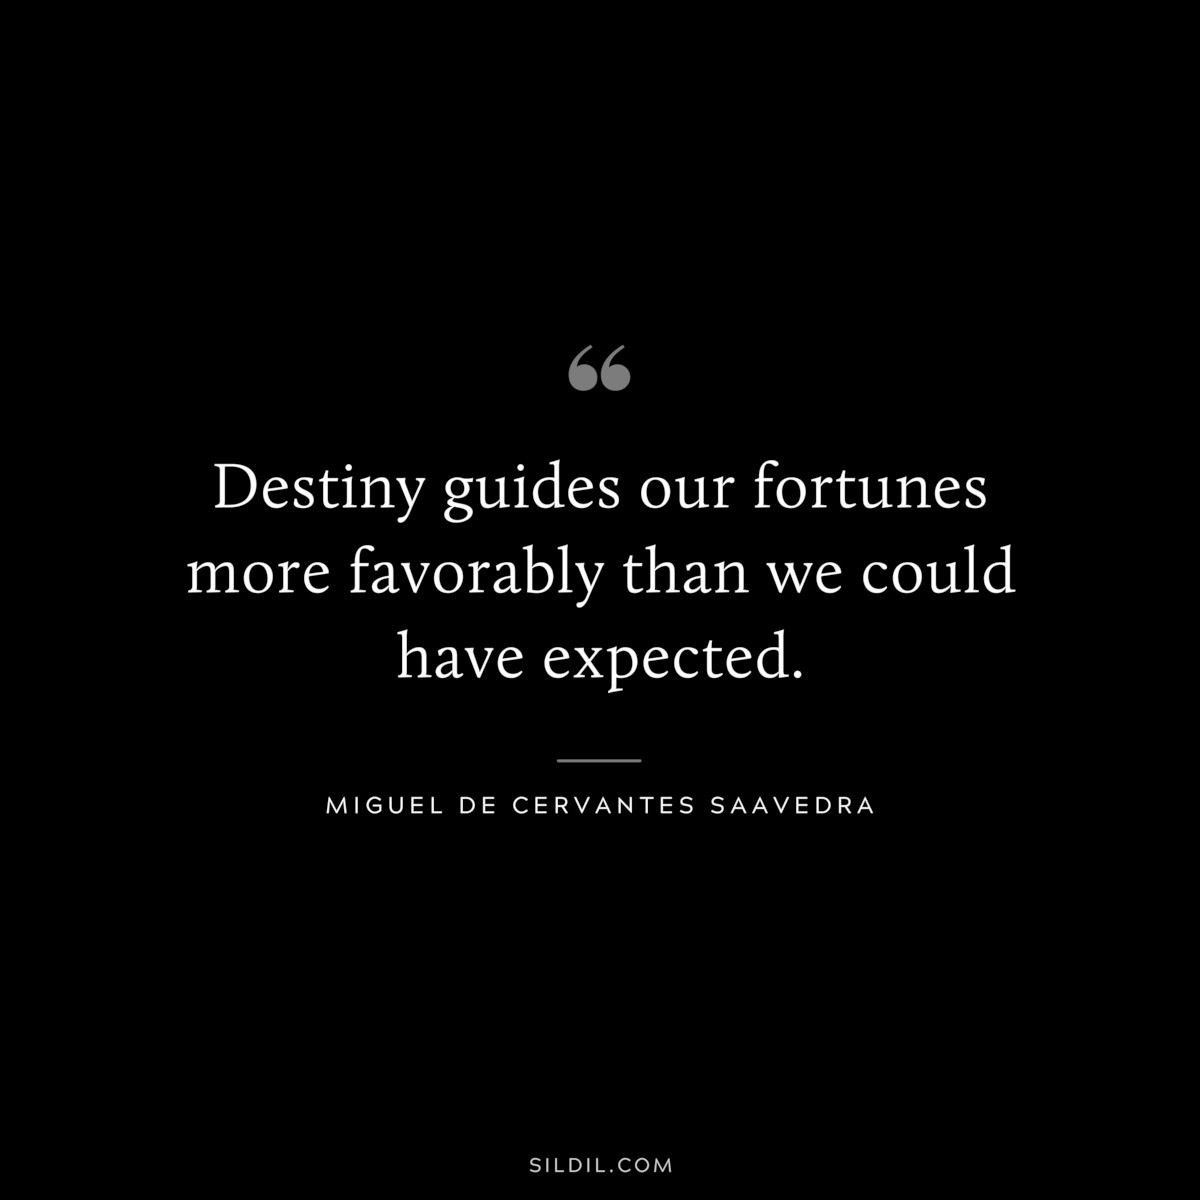 Destiny guides our fortunes more favorably than we could have expected. ― Miguel de Cervantes Saavedra